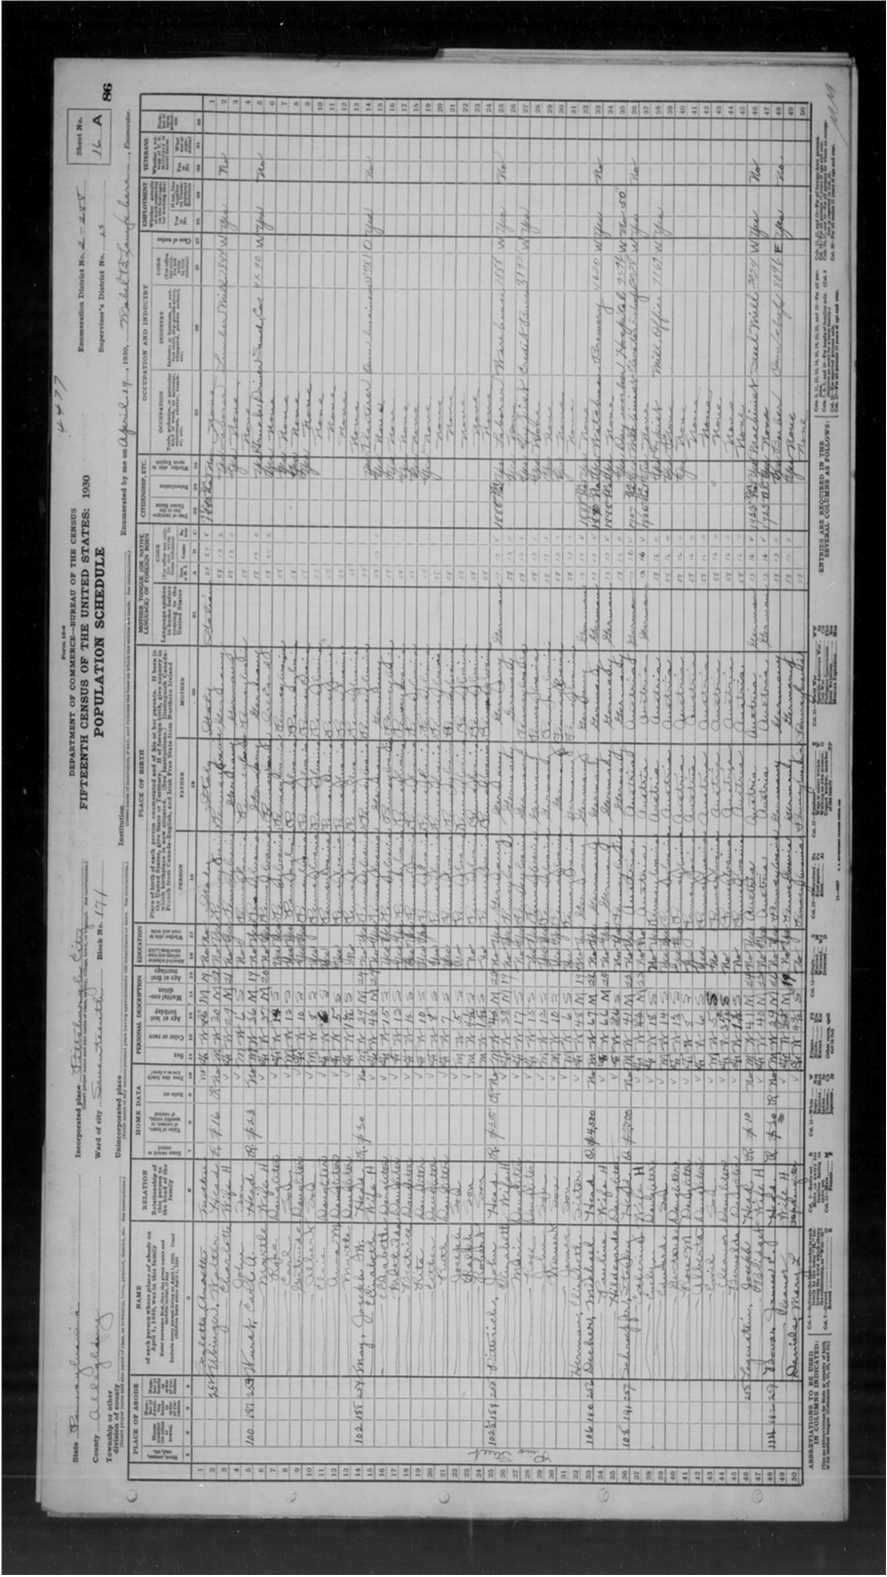 1930 schroepfer census pittsburgh pa.